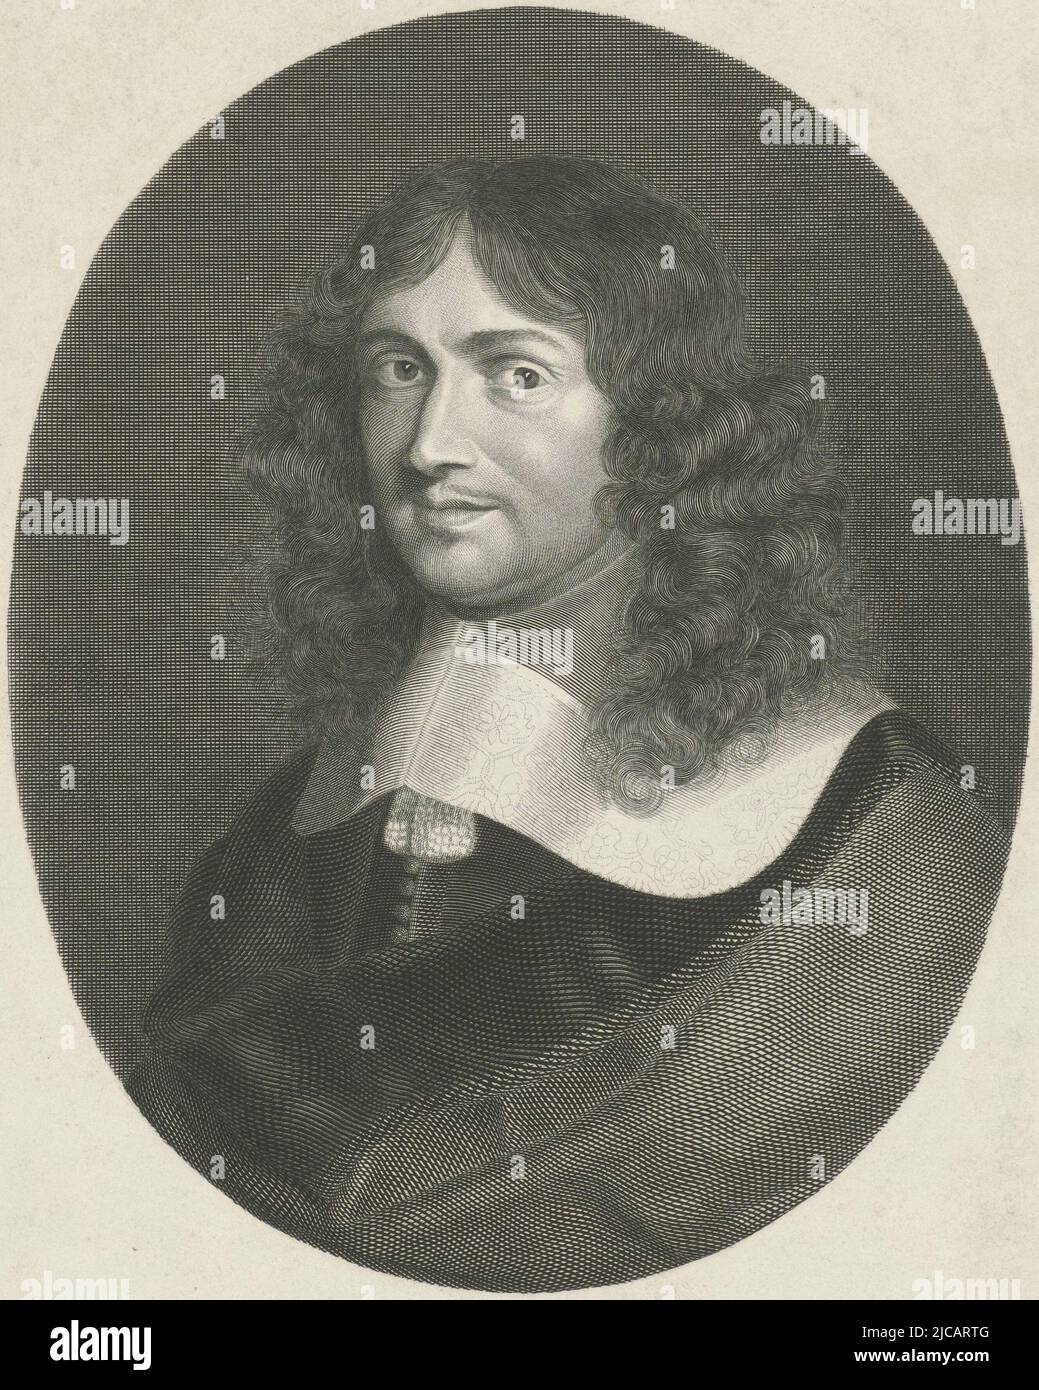 Portrait of Jean-Baptiste Colbert, Marquis of Seignelay and French politician, Portrait of Jean-Baptiste Colbert, print maker: Jan Frederik Christiaan Reckleben, (mentioned on object), after: Philippe de Champaigne, Amsterdam, 1843, paper, engraving, h 375 mm × w 256 mm Stock Photo